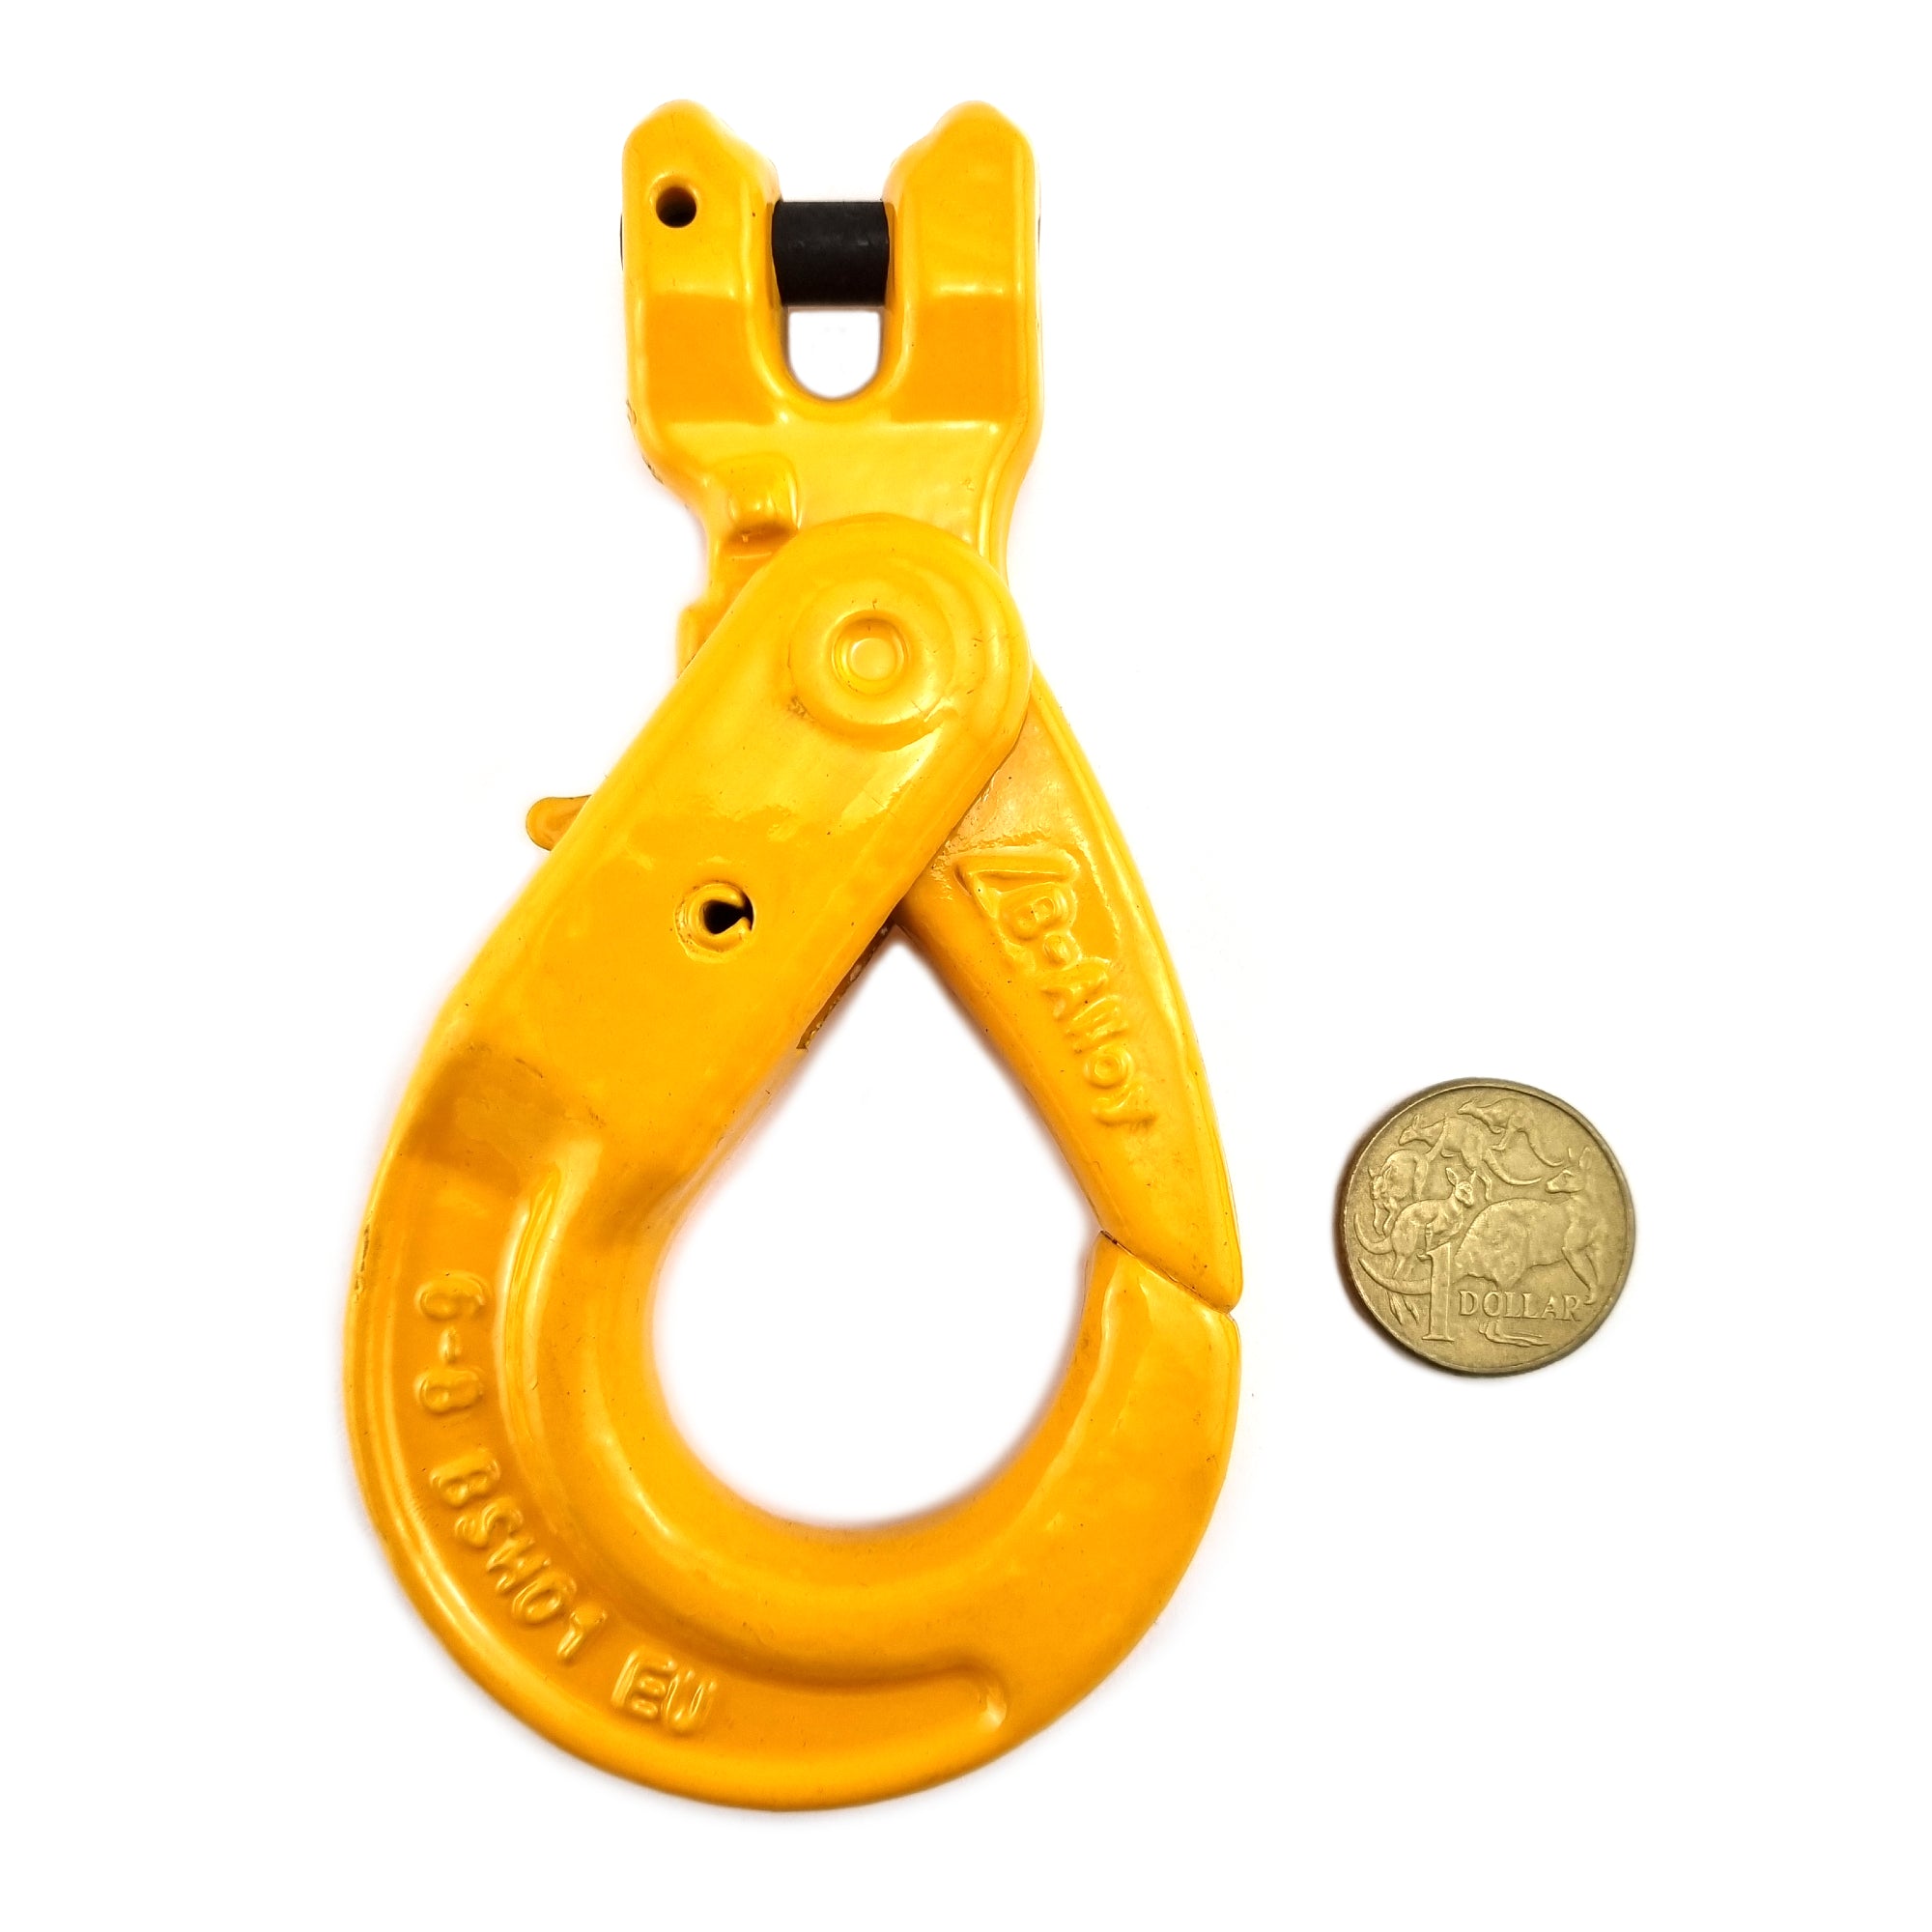 6mm Clevis self locking hook, grade T(80) with 1.2 tonne rating. Shop hardware, lifting, rigging, load restraint equipment online chain.com.au